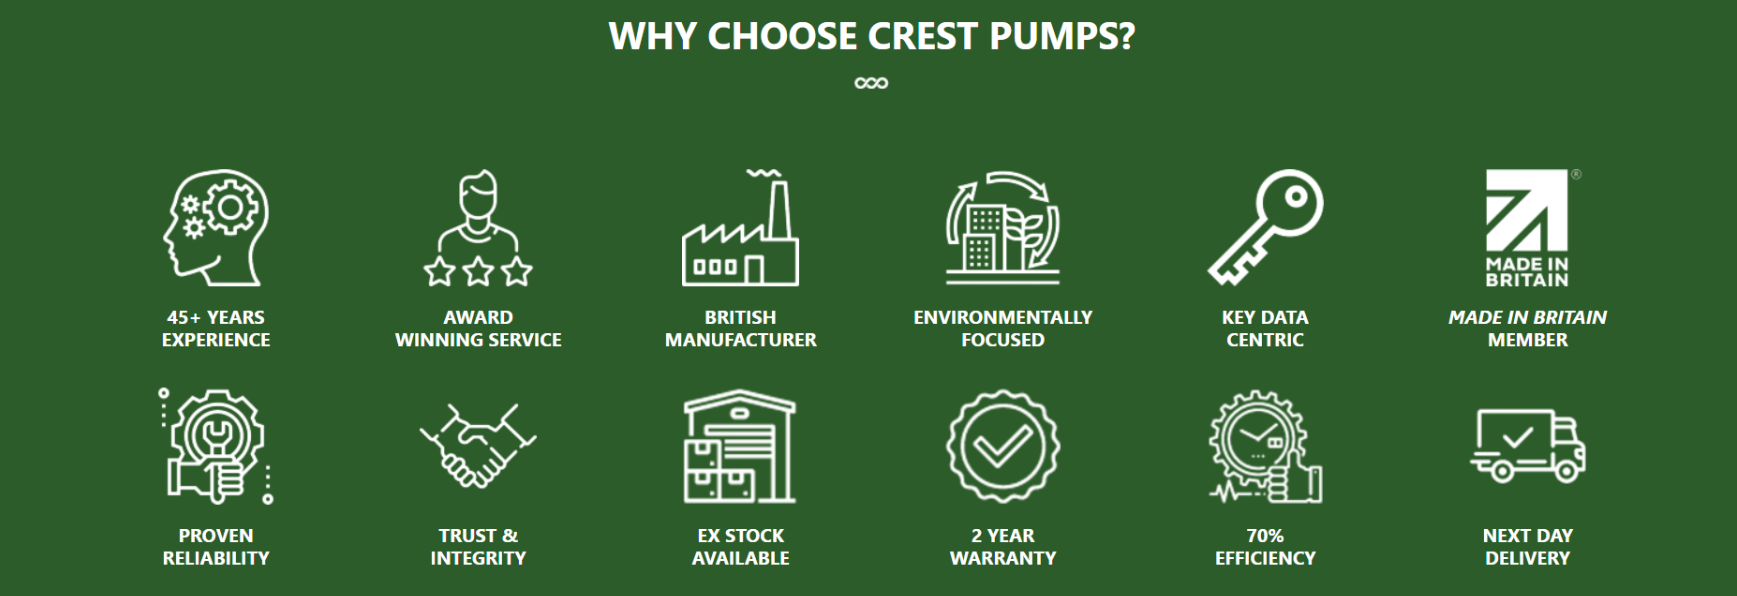 why choose crest